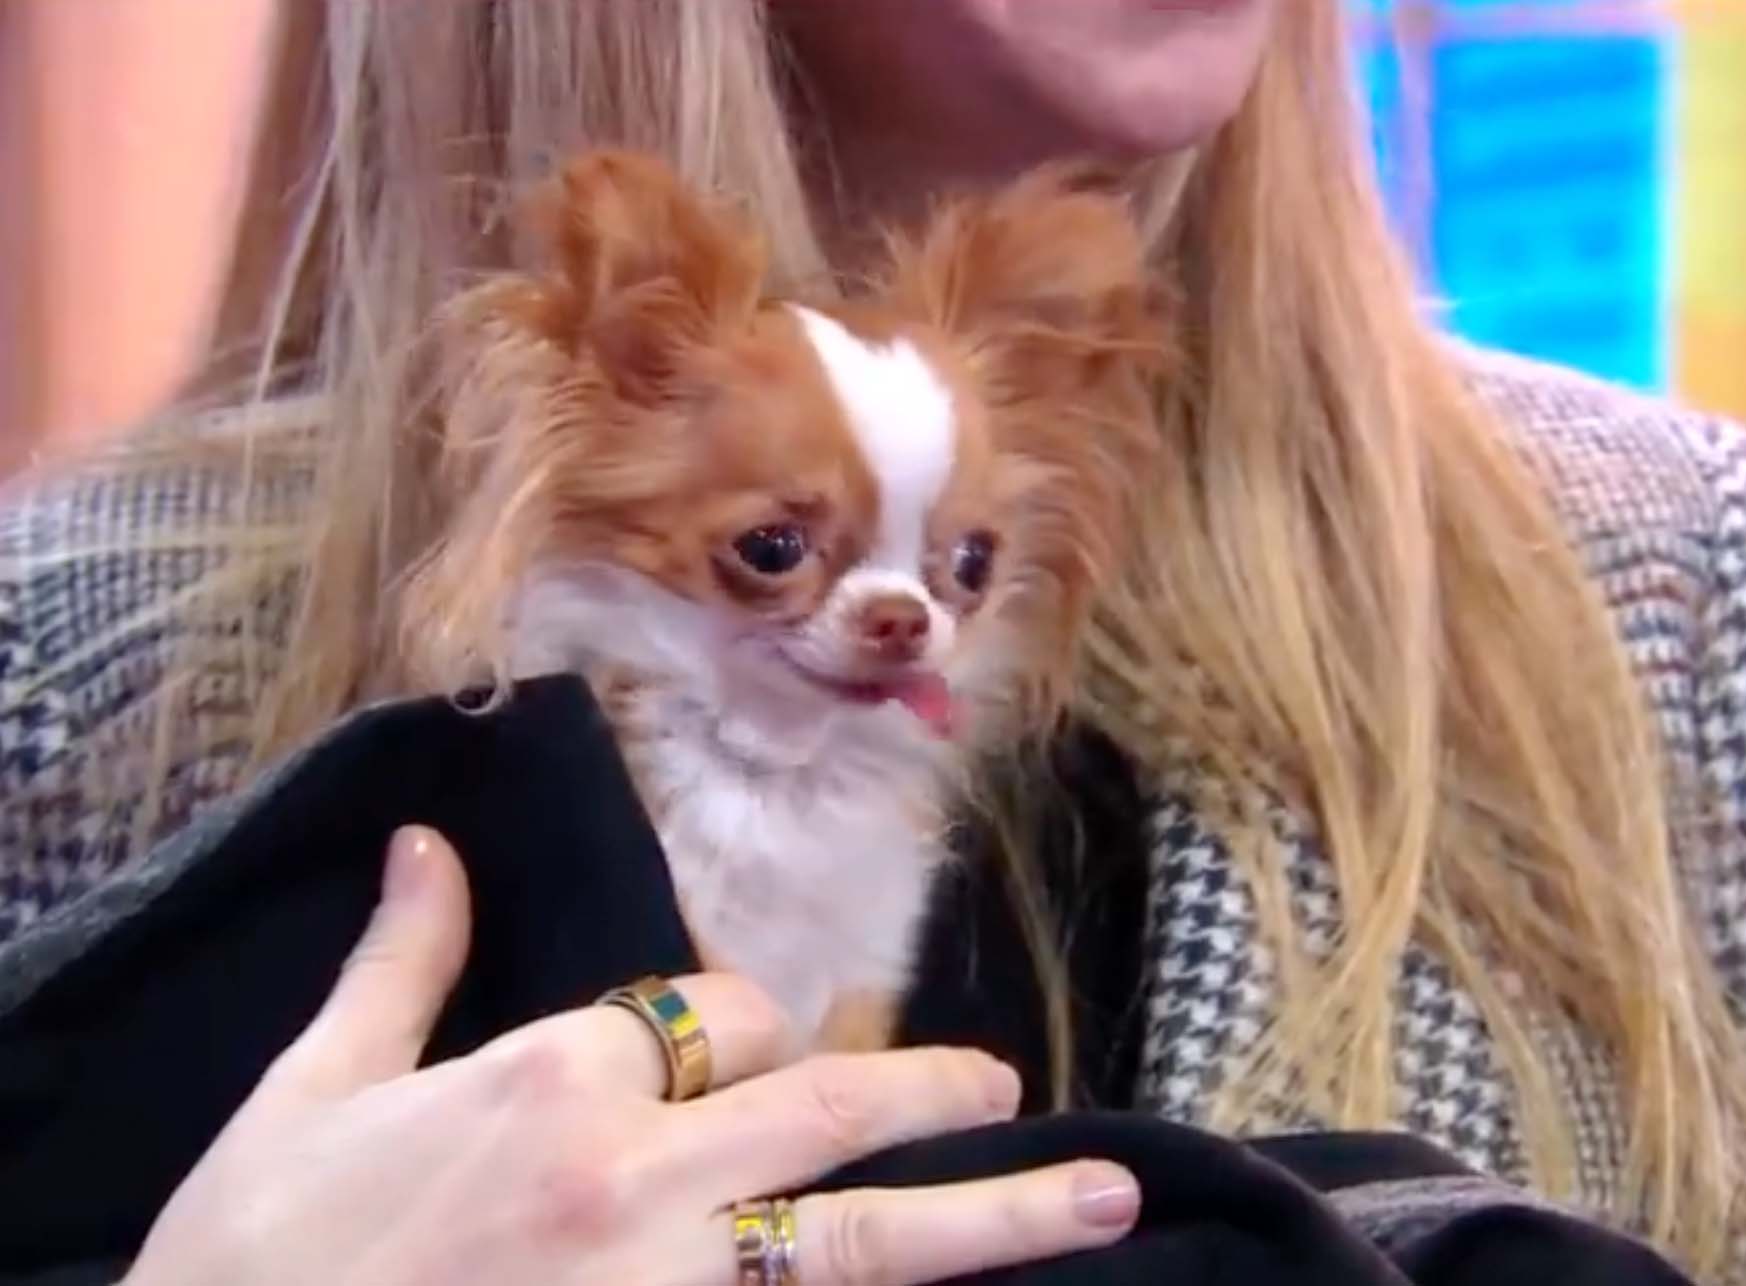 The hosts were obsessed with her dog Pilaf